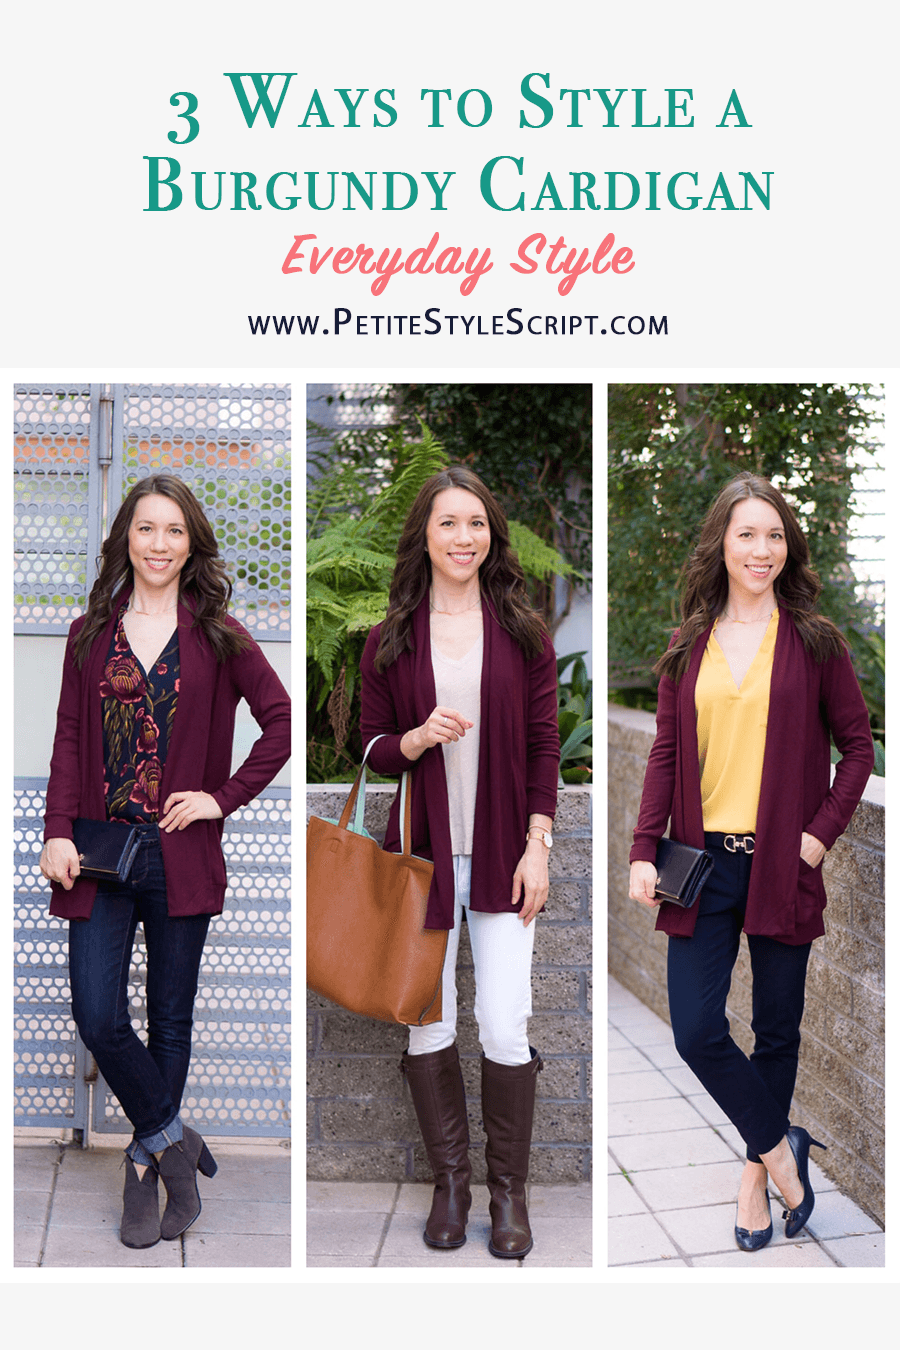 Burgundy Ankle Boots with Black Leggings Outfits (4 ideas & outfits)